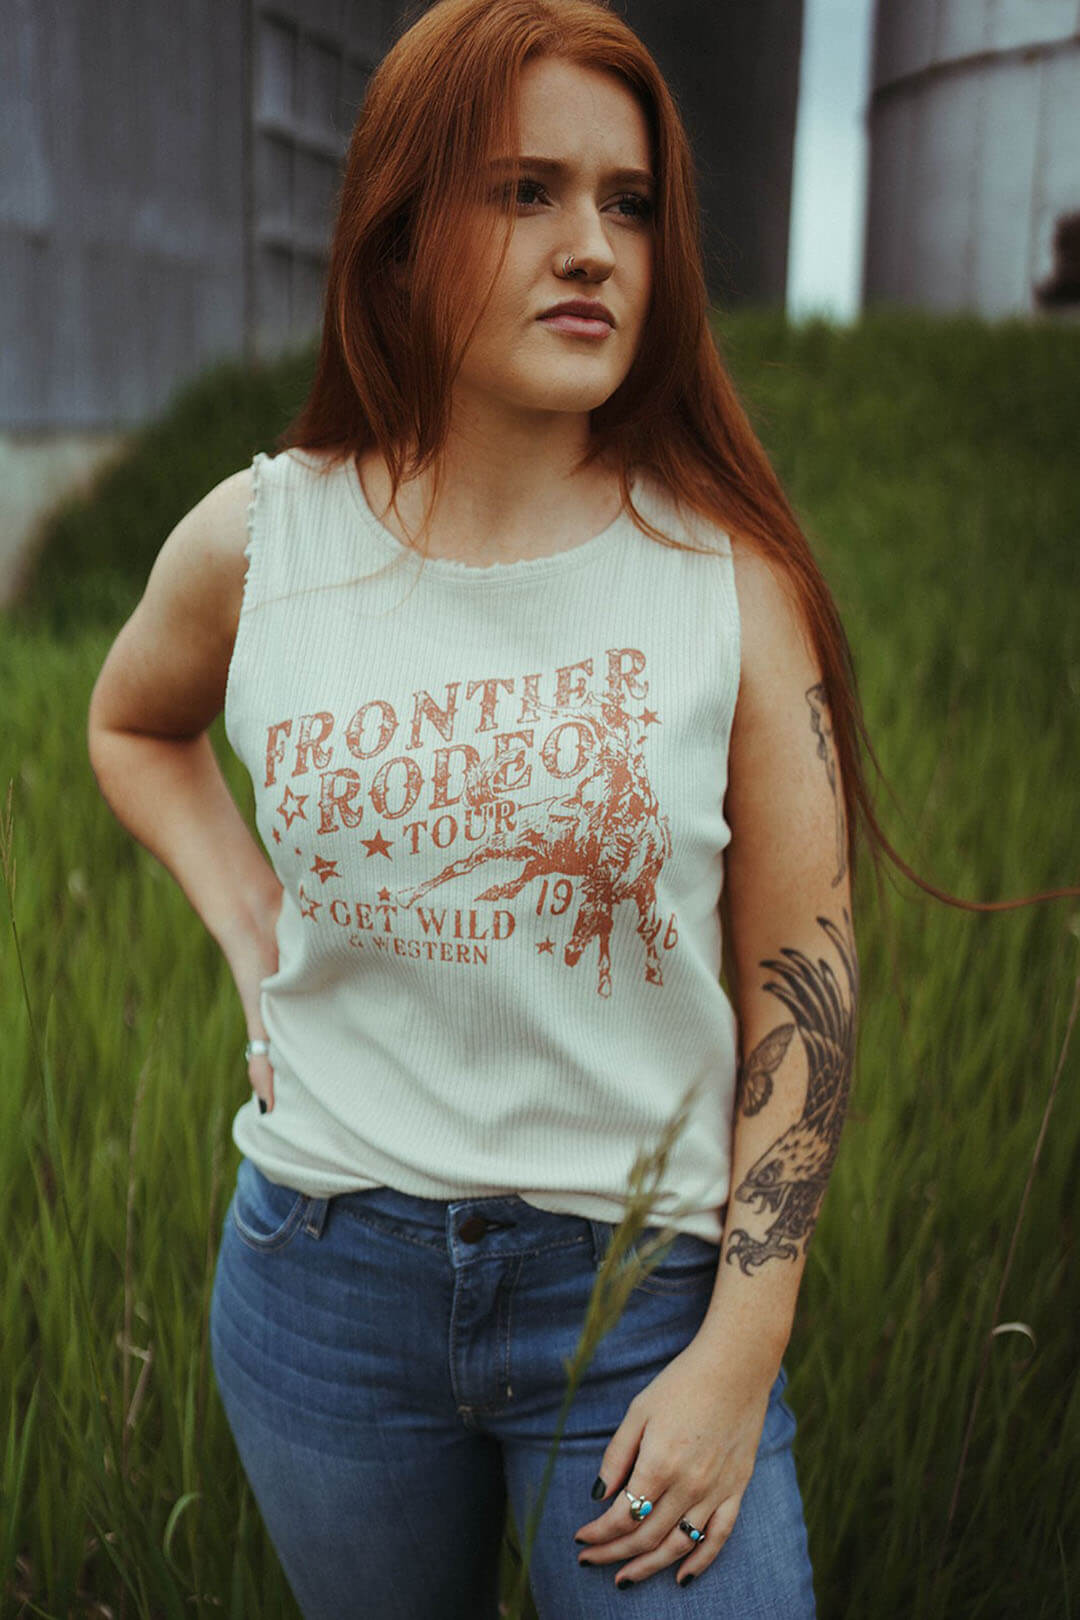 Woman modeling the Rib Graphic Tank by Rock & Roll Denim.  Says "Frontier Rodeo Tour" Get Wild & Western.  